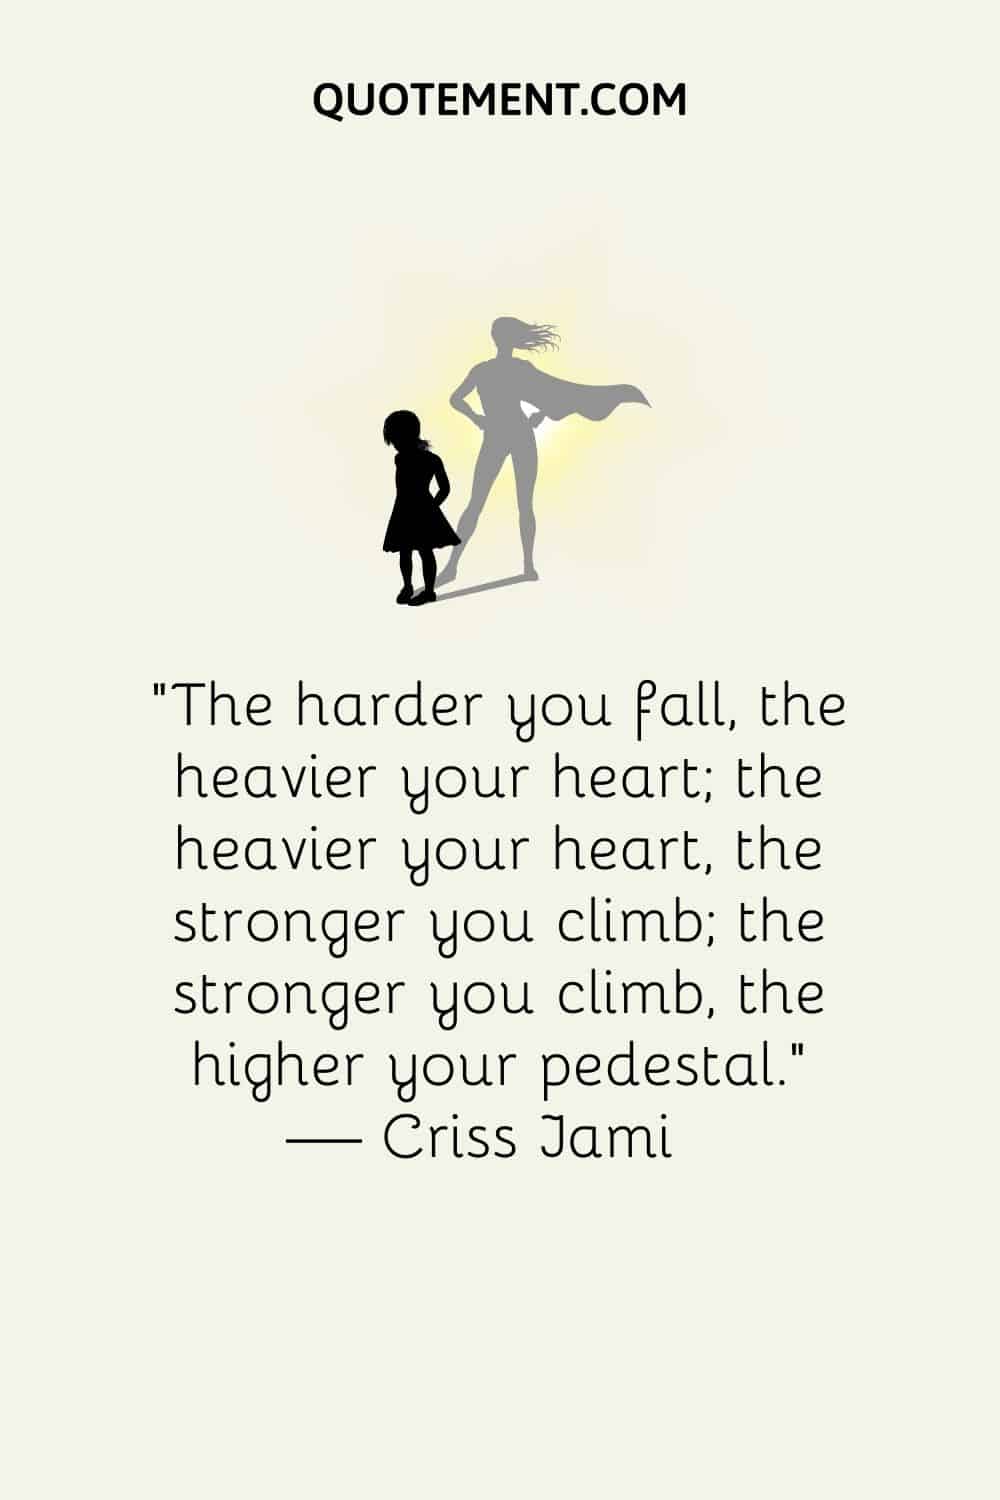 “The harder you fall, the heavier your heart; the heavier your heart, the stronger you climb; the stronger you climb, the higher your pedestal.” ― Criss Jami